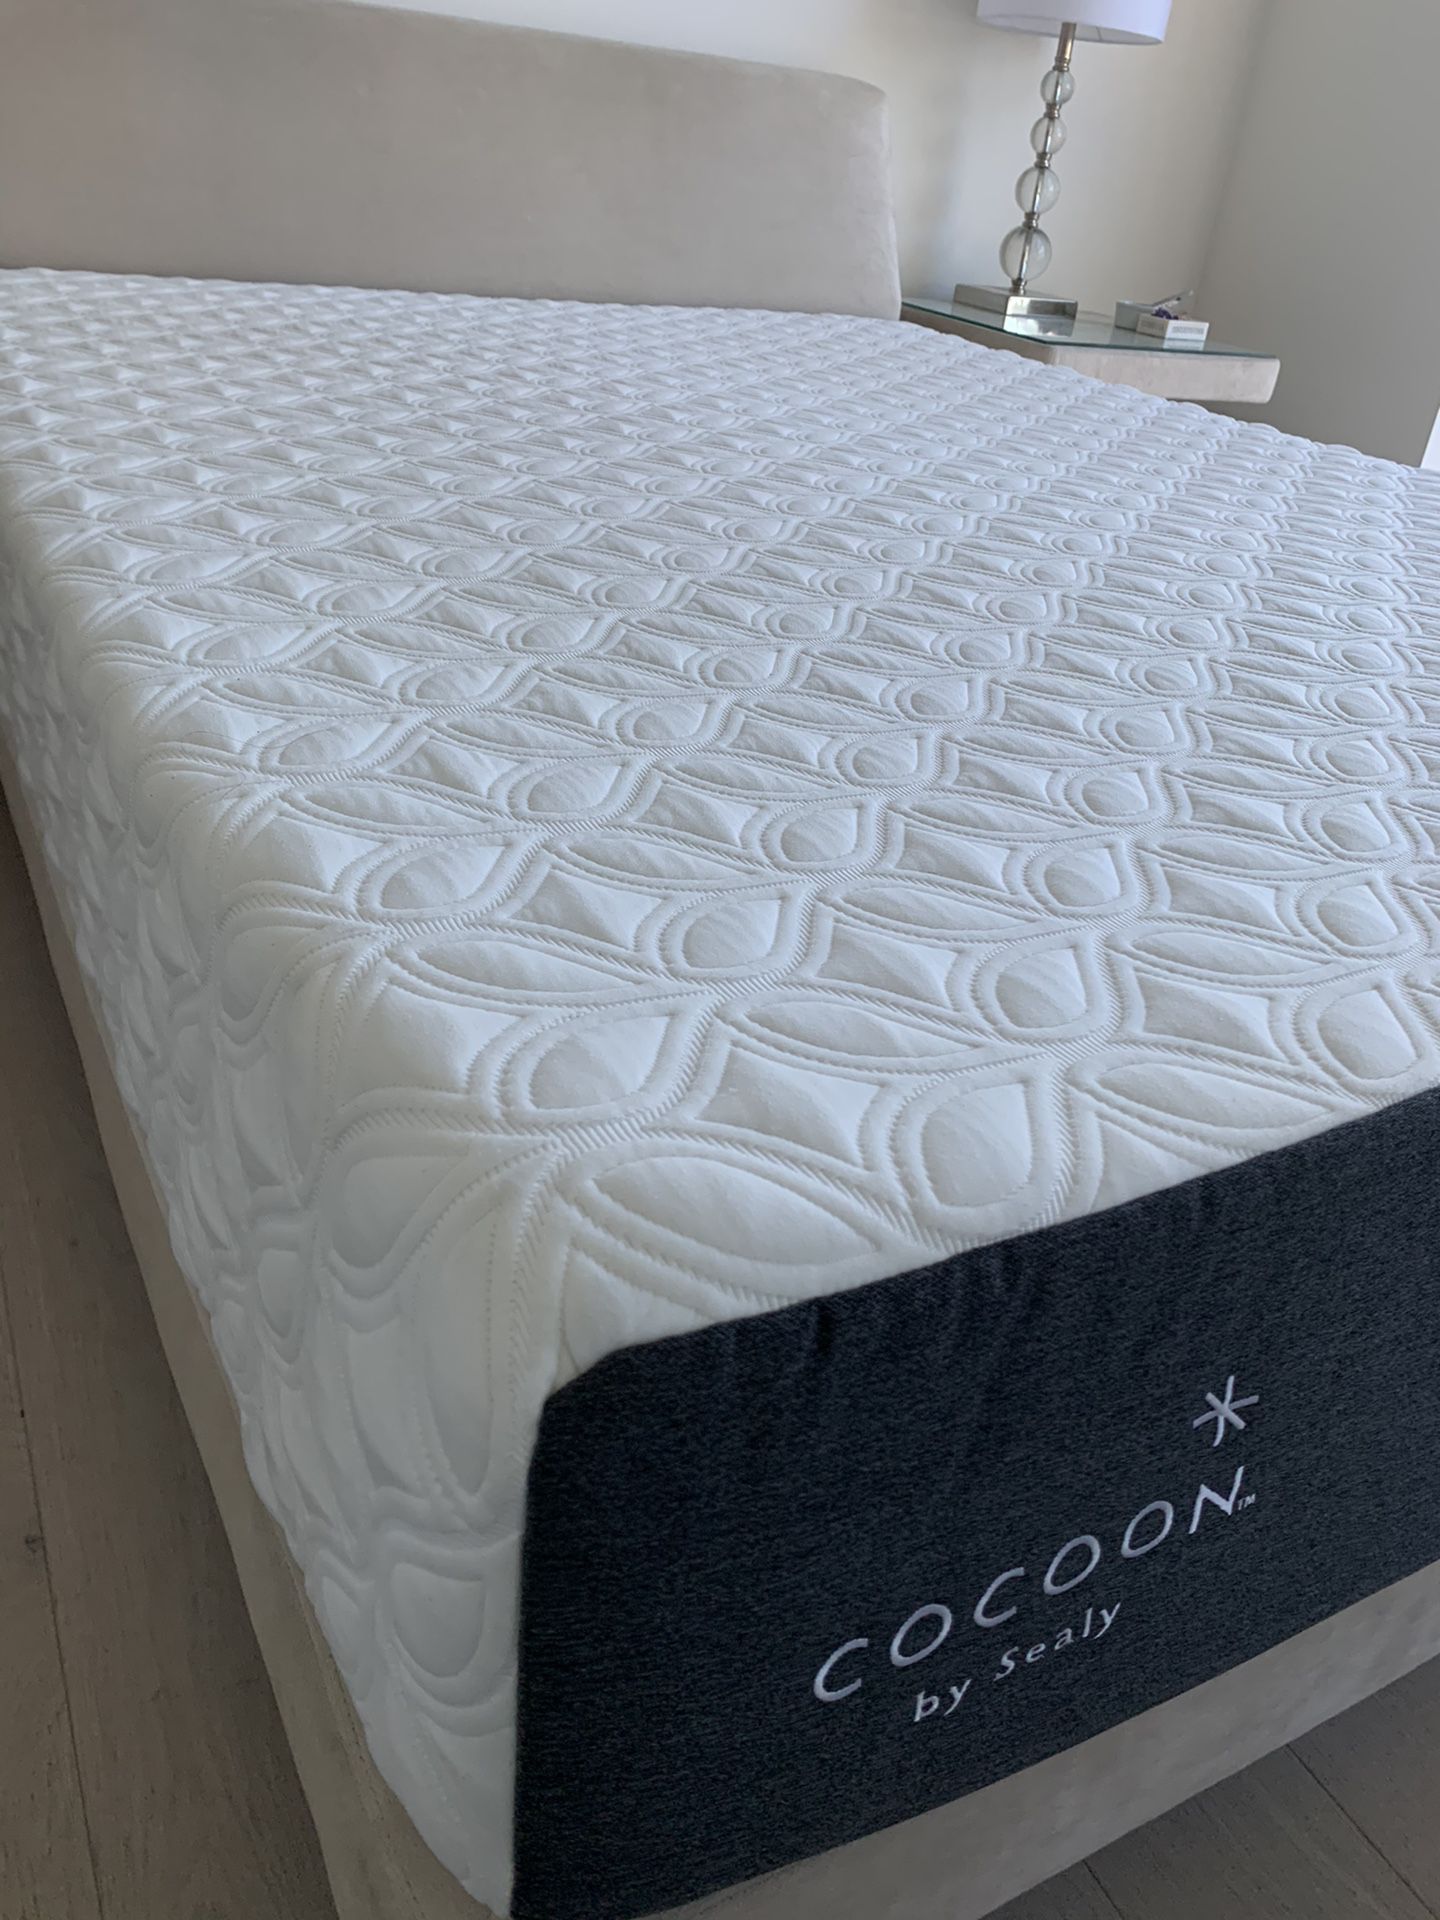 Sealy Cocoon Chill Memory Foam Mattress (Queen Size)